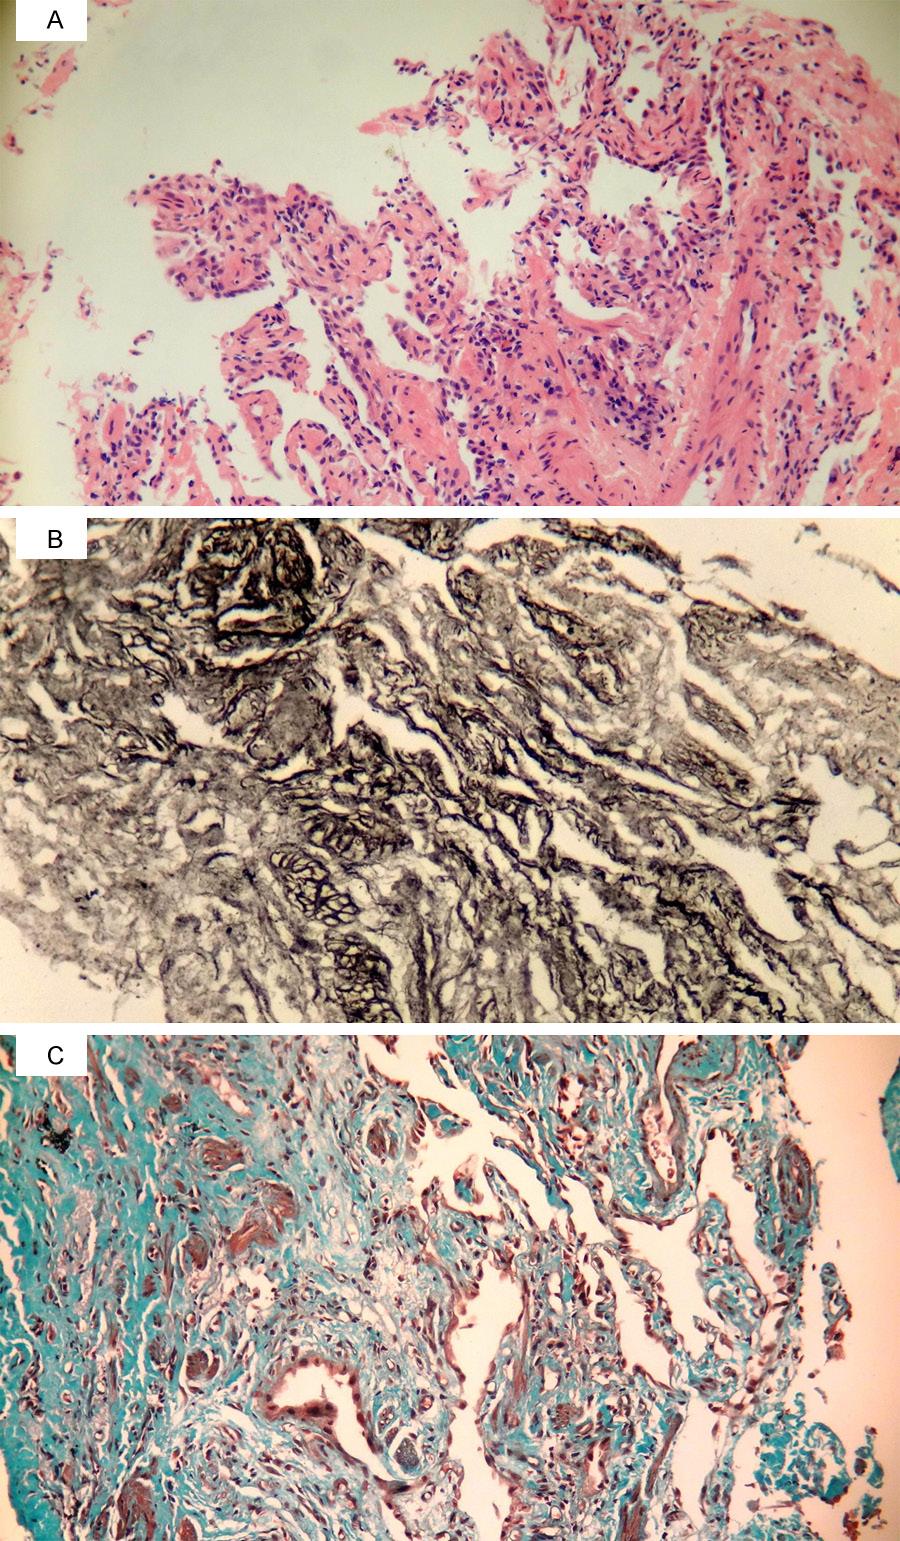 Figure 3. A. Association of fibrotic thickening and type 1 pneumocyte hyperplasia of the alveolar septa without inflammatory cells. No exudates were found in the alveolar lumen.